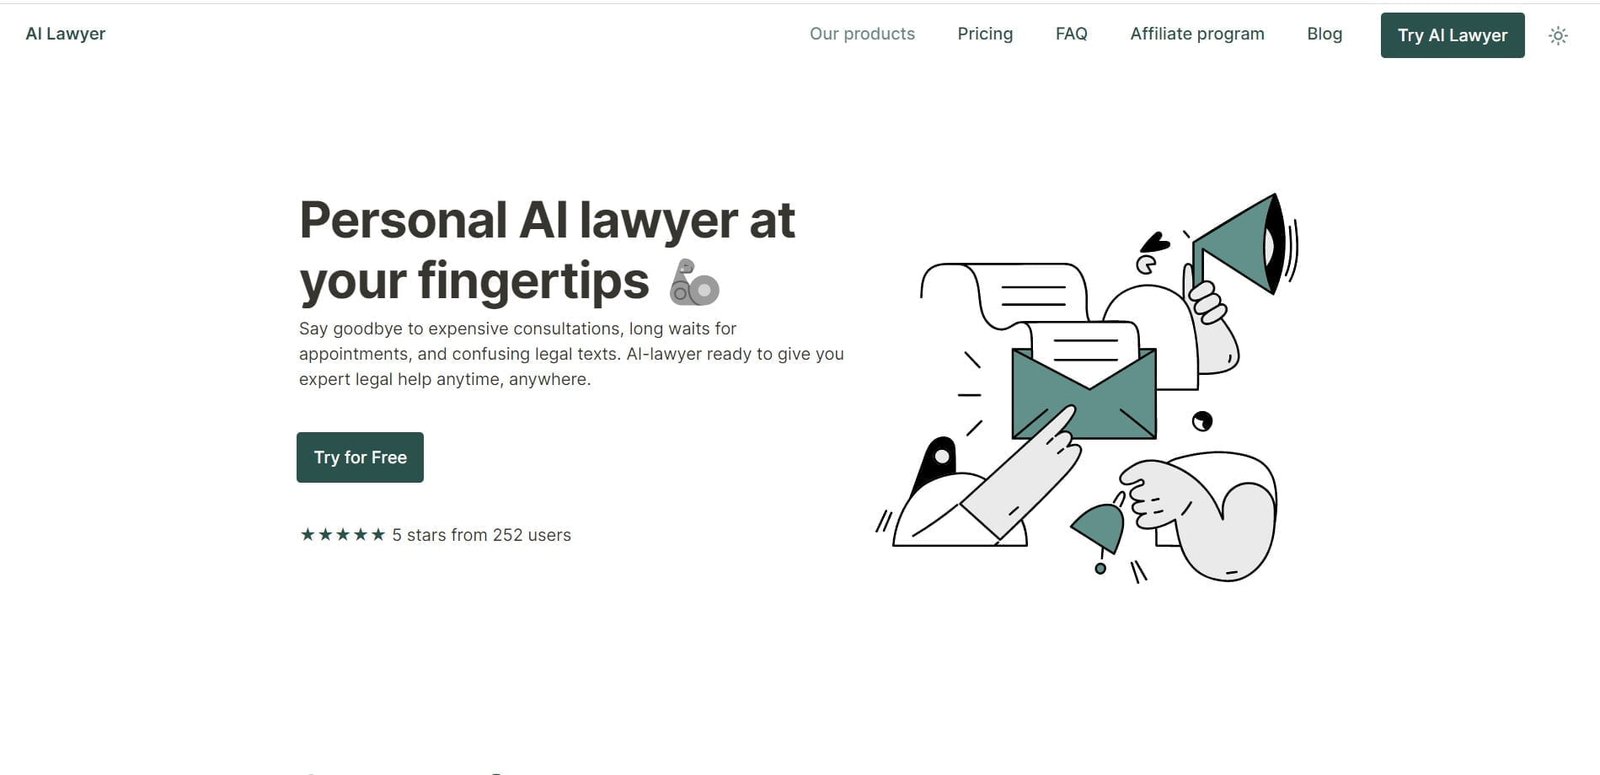 AI Lawyer is an AI law platform tool designed to provide instant legal assistance such as legal document drafting and review